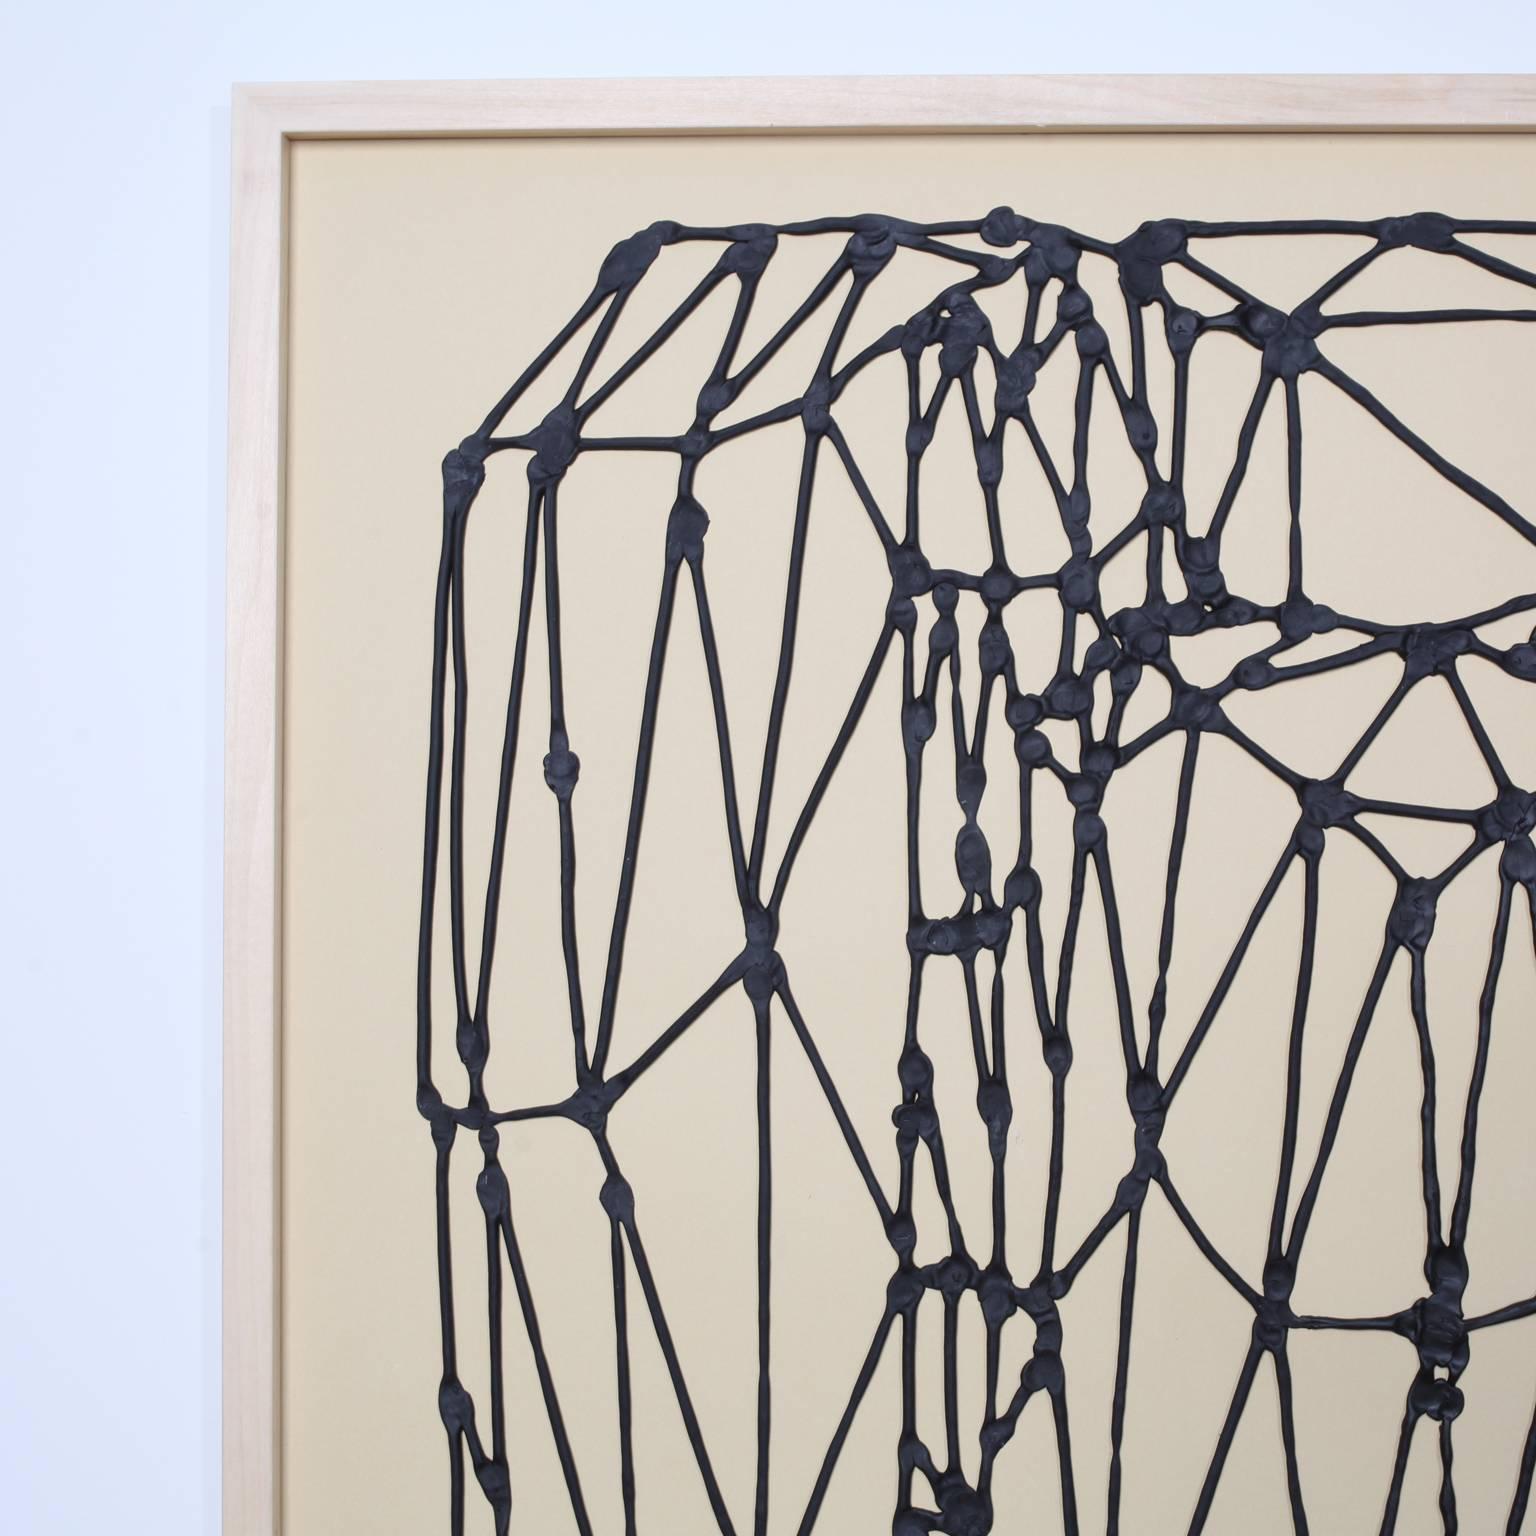 This is a very tactile drawing made from extruded black latex that rises above the surface of the paper. Each intersection of lines has been delicately molded, resulting in irregular traces of the artist's fingerprints. Eric von Robertson’s